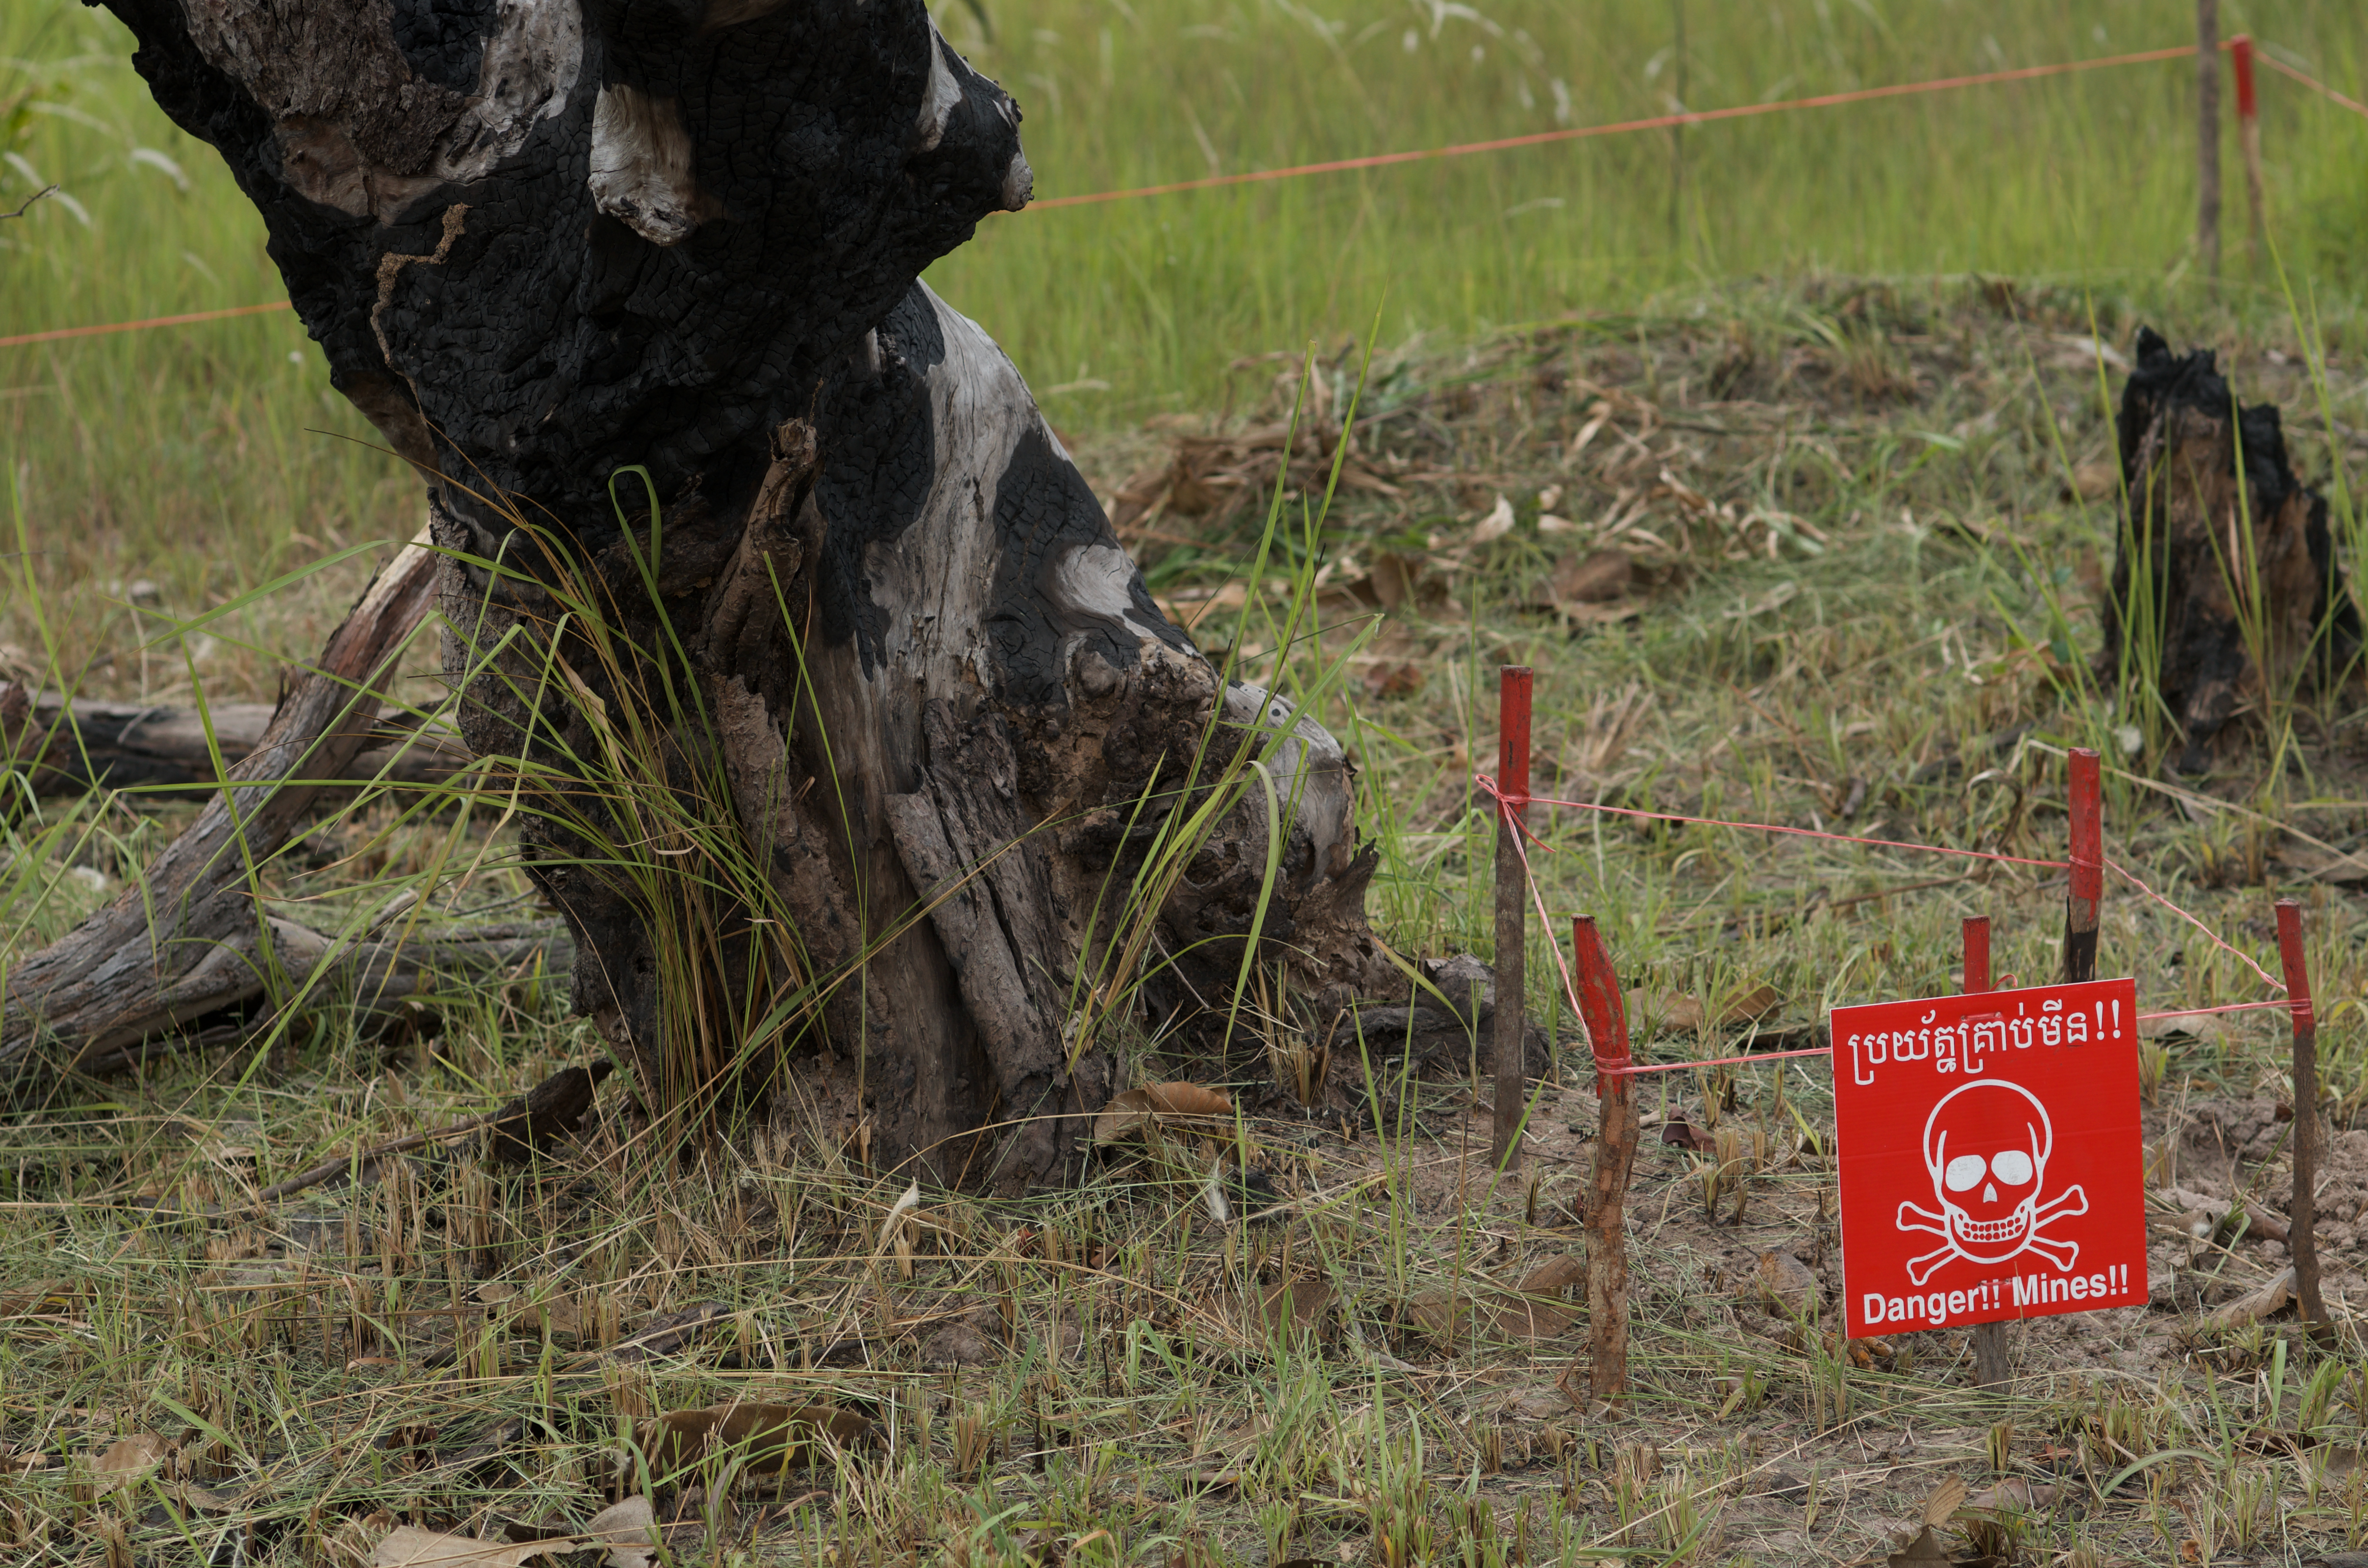 A photograph of a green field with a tree trunk growing out of it. In front of the tree, there is a red sign with a drawing of skull and crossbones and text reading "Danger!! Mines!!"